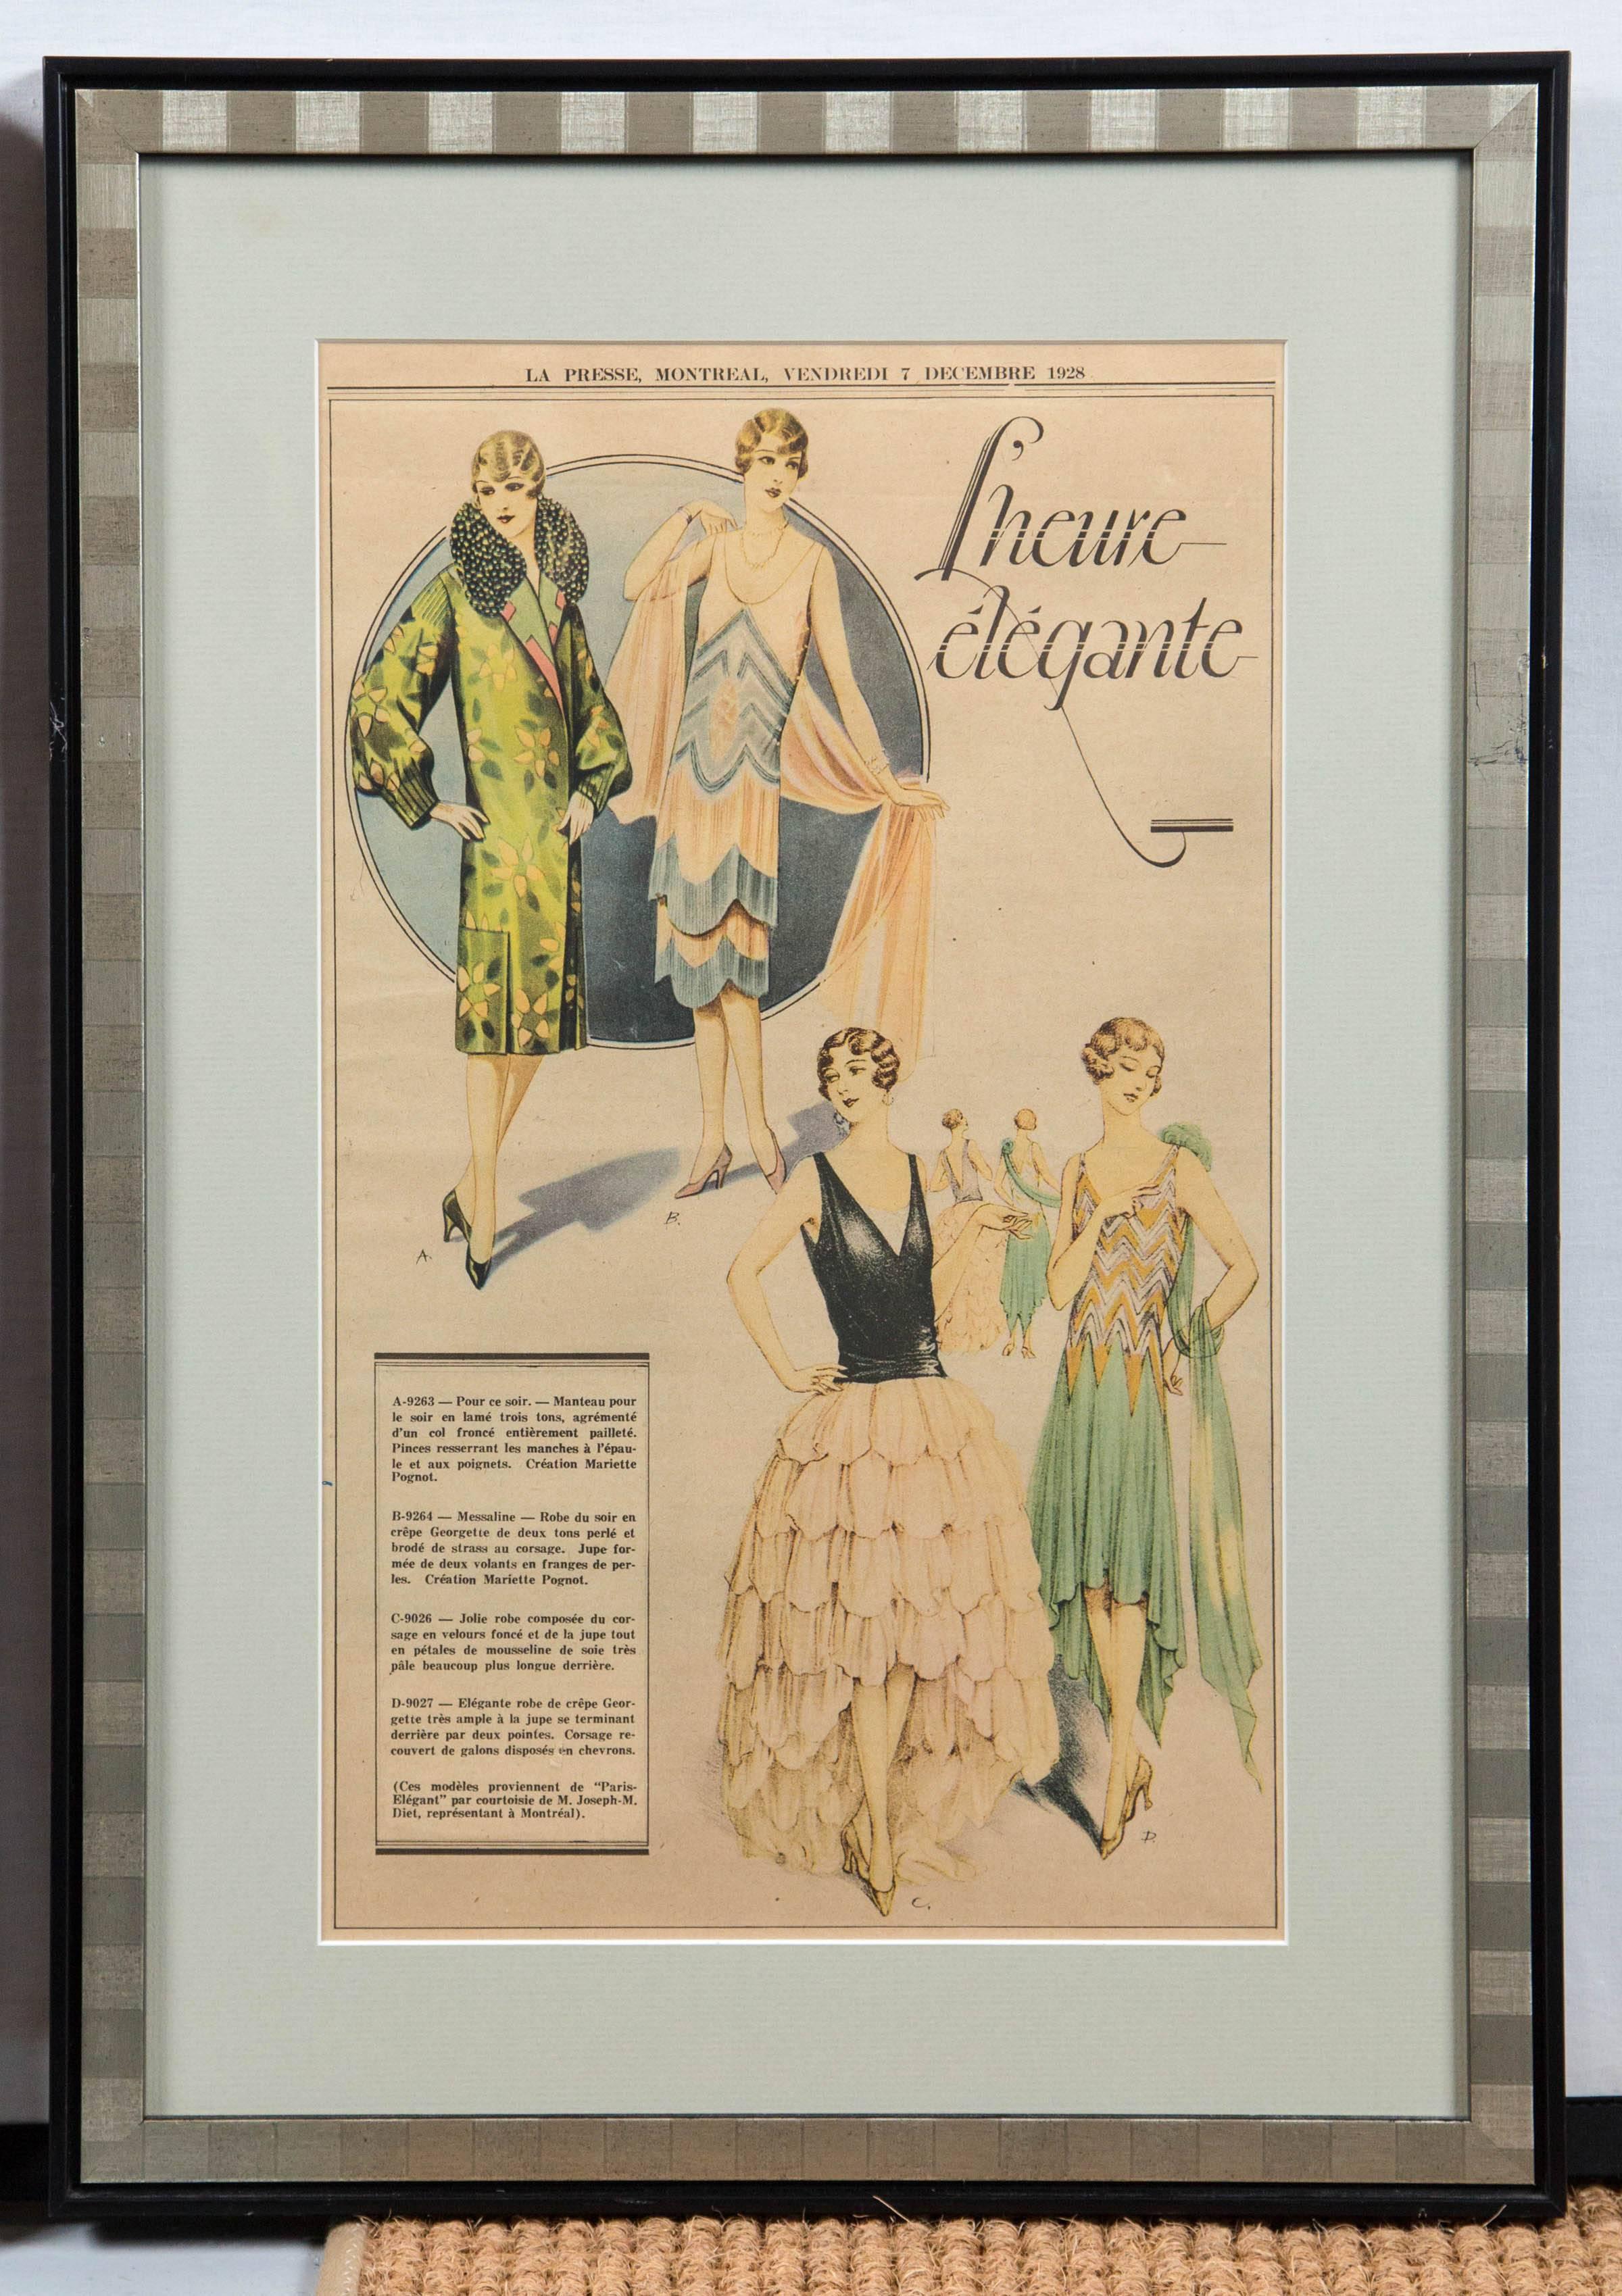 Pair of vintage fashion advertisements, La Presse Montreal, 1928. Wonderful images of dresses from the 